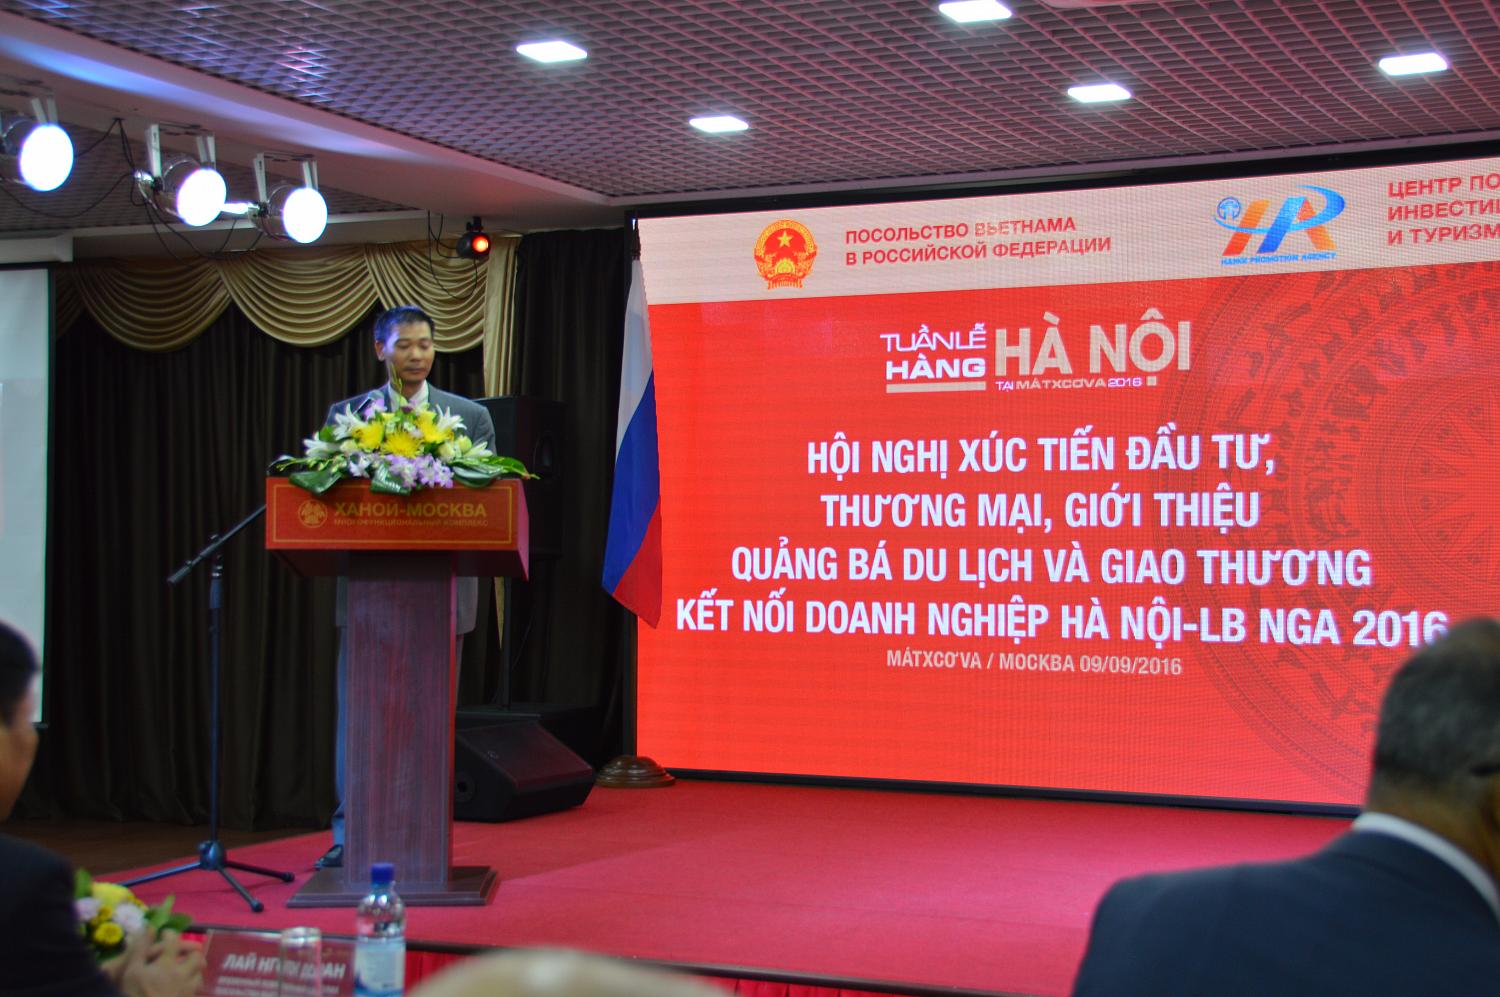 Business conference on promoting the city of Hanoi's investment, trade and tourism in the Russian Federation took place in Moscow.